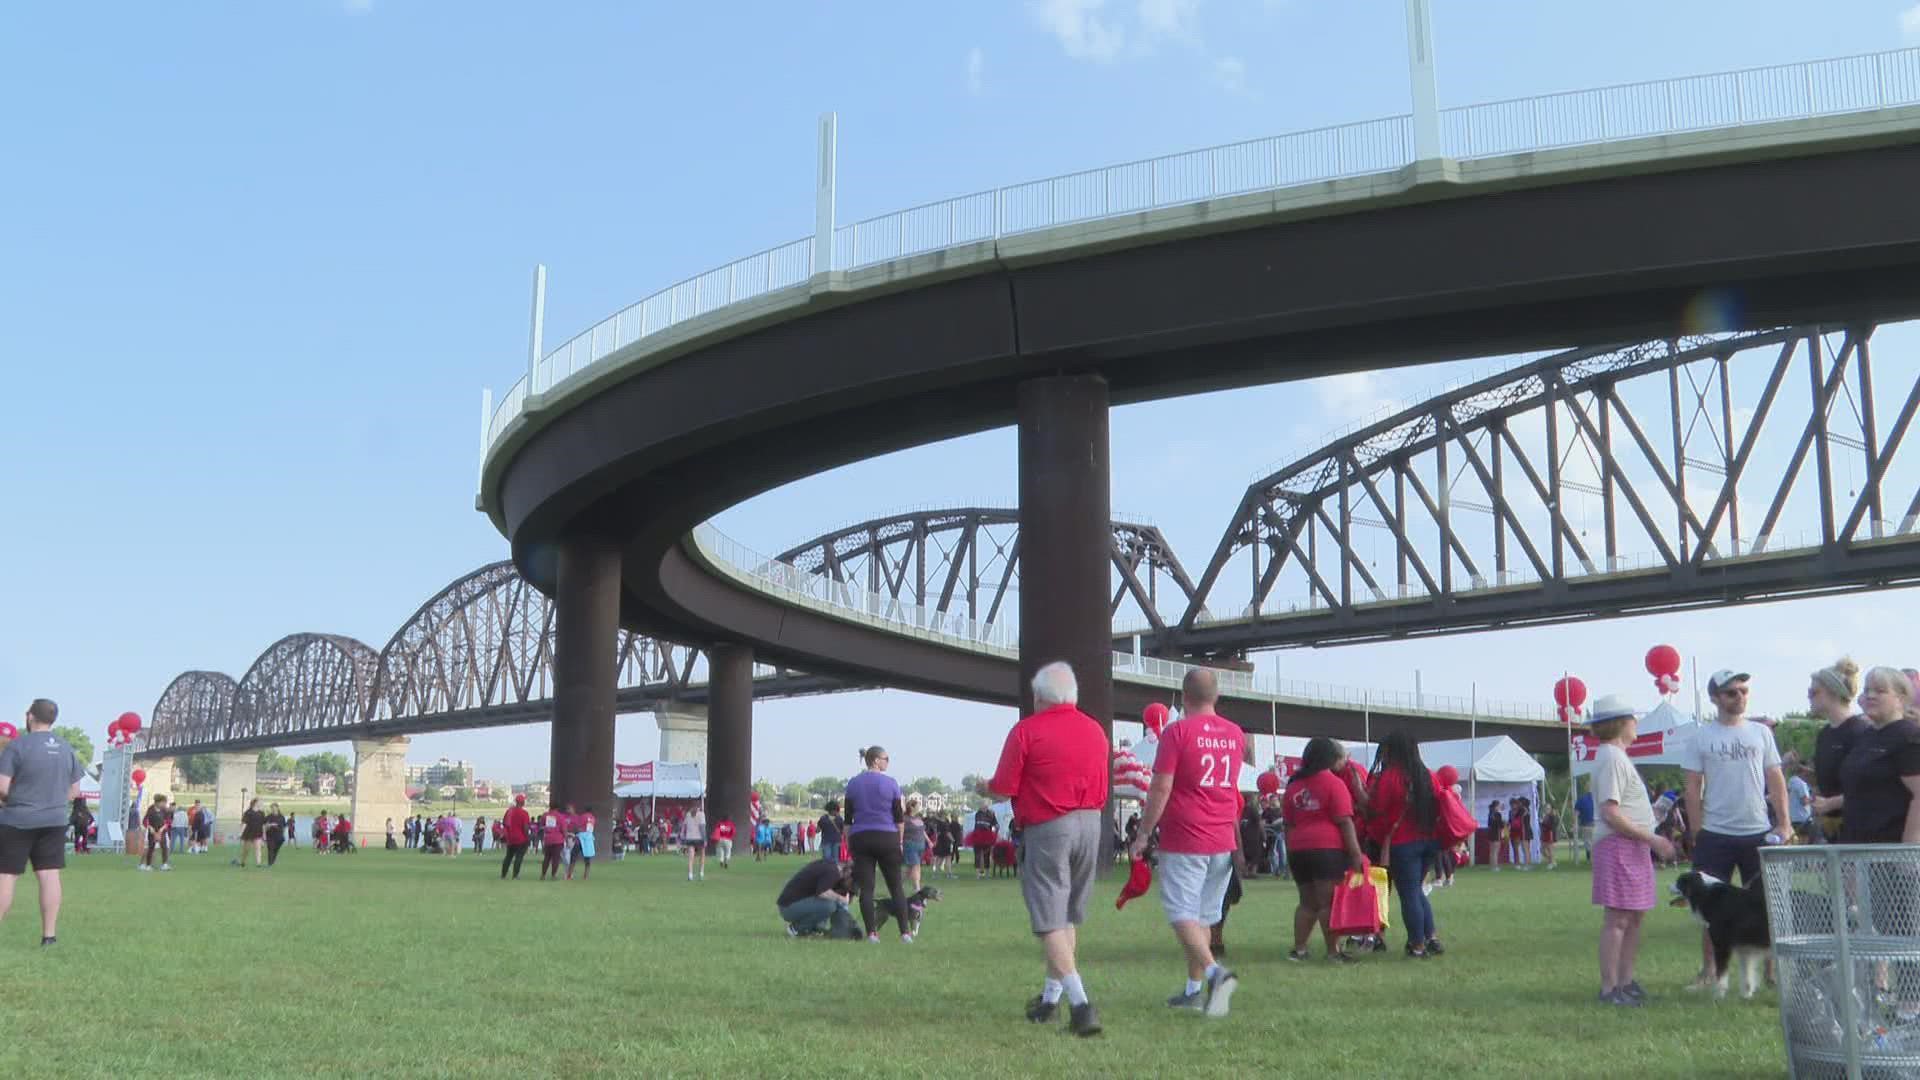 The annual walk, which helps raise awareness about heart health, took place at the Big Four Bridge Saturday morning.